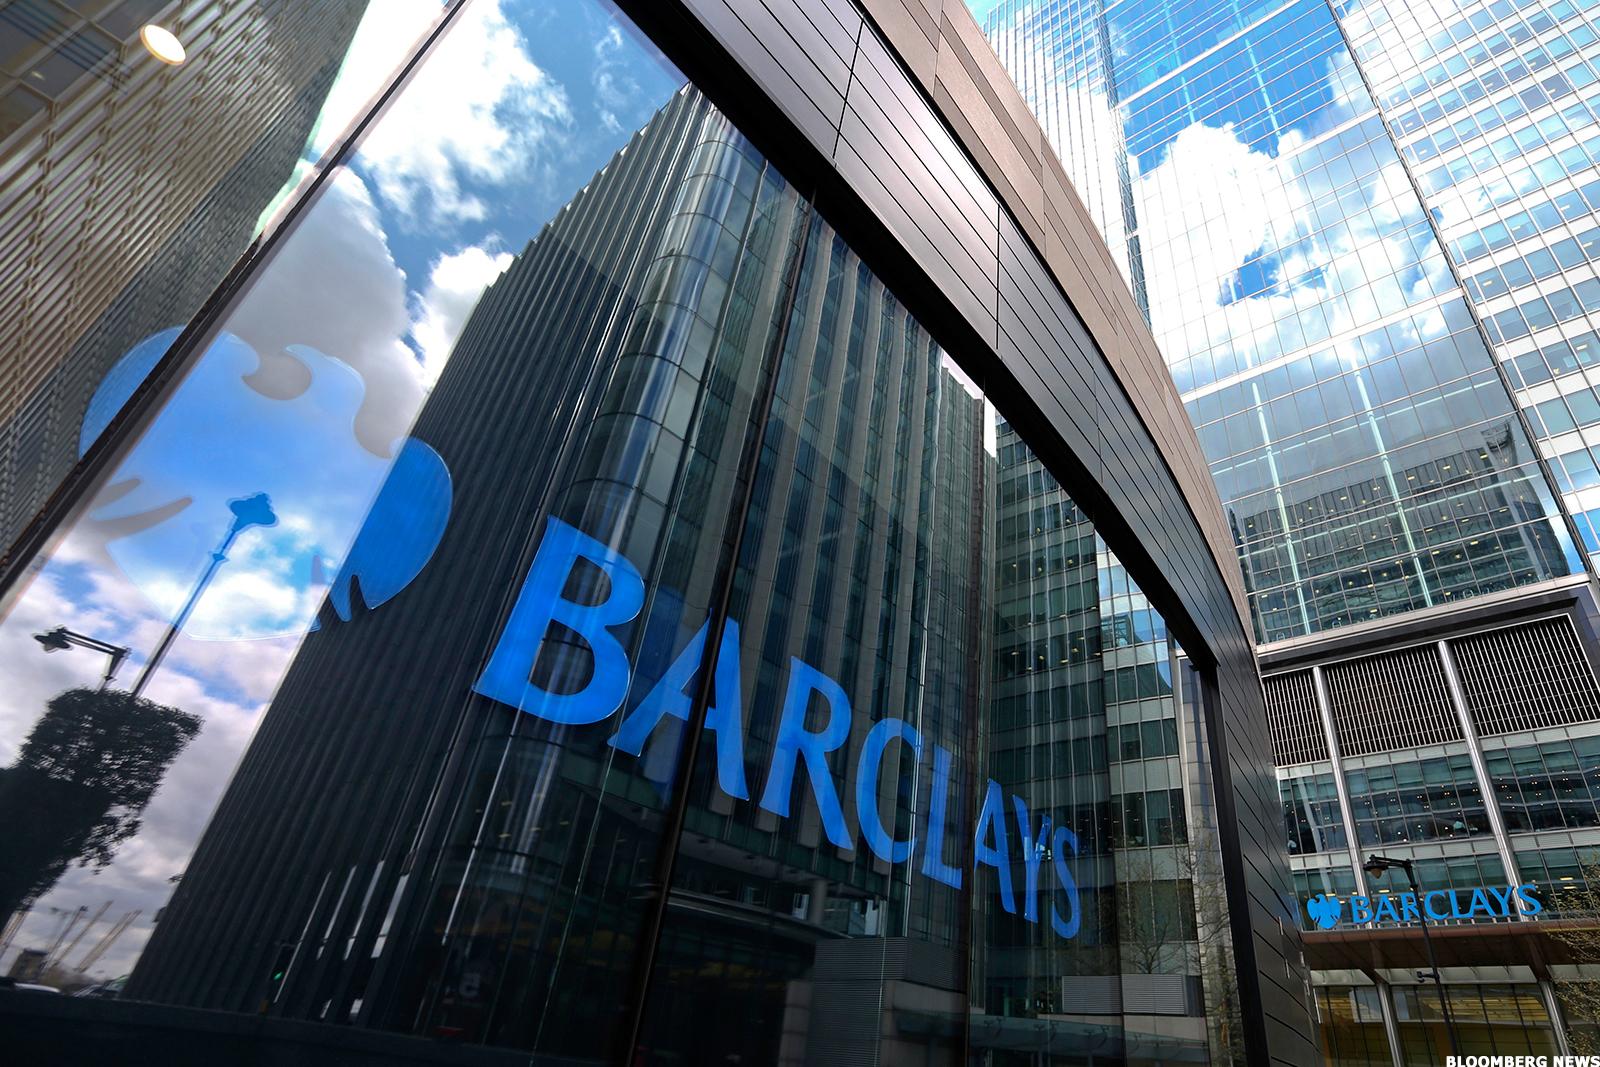 Financial regulators are investigating Barclays boss, Jes Staley, after he tried to identify a whistle-blower